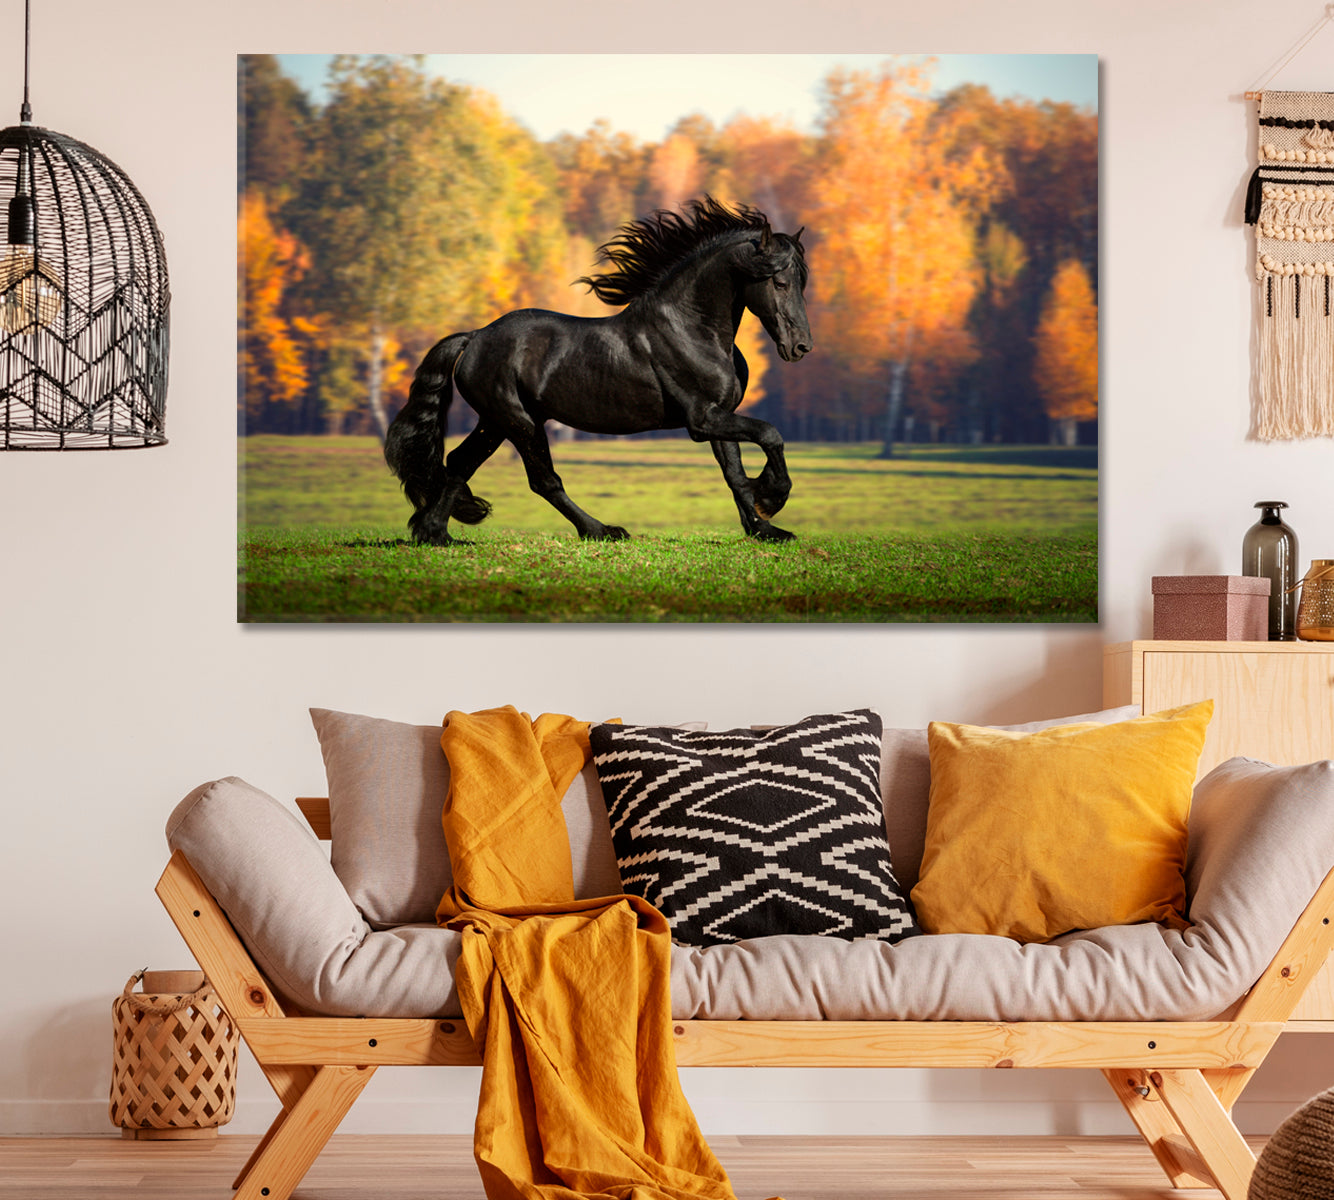 Black Friesian Horse in Autumn Forest Canvas Print ArtLexy 1 Panel 24"x16" inches 